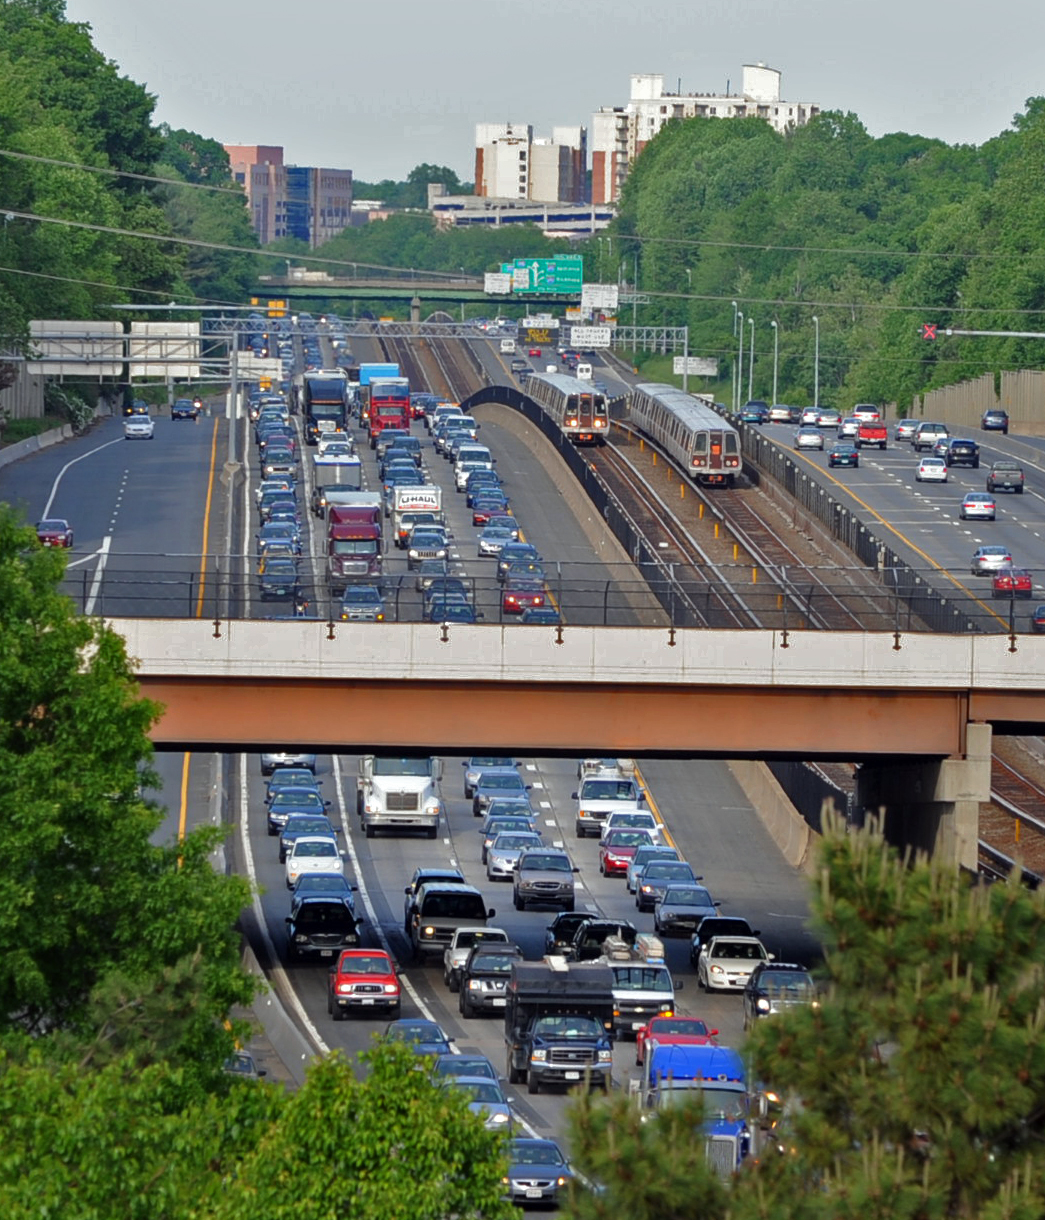 Metro trains move to and from the Vienna Metro Station alongside I-66 traffic in Fairfax, VA. on May 18, 2009. (Washington Post/Getty Images)